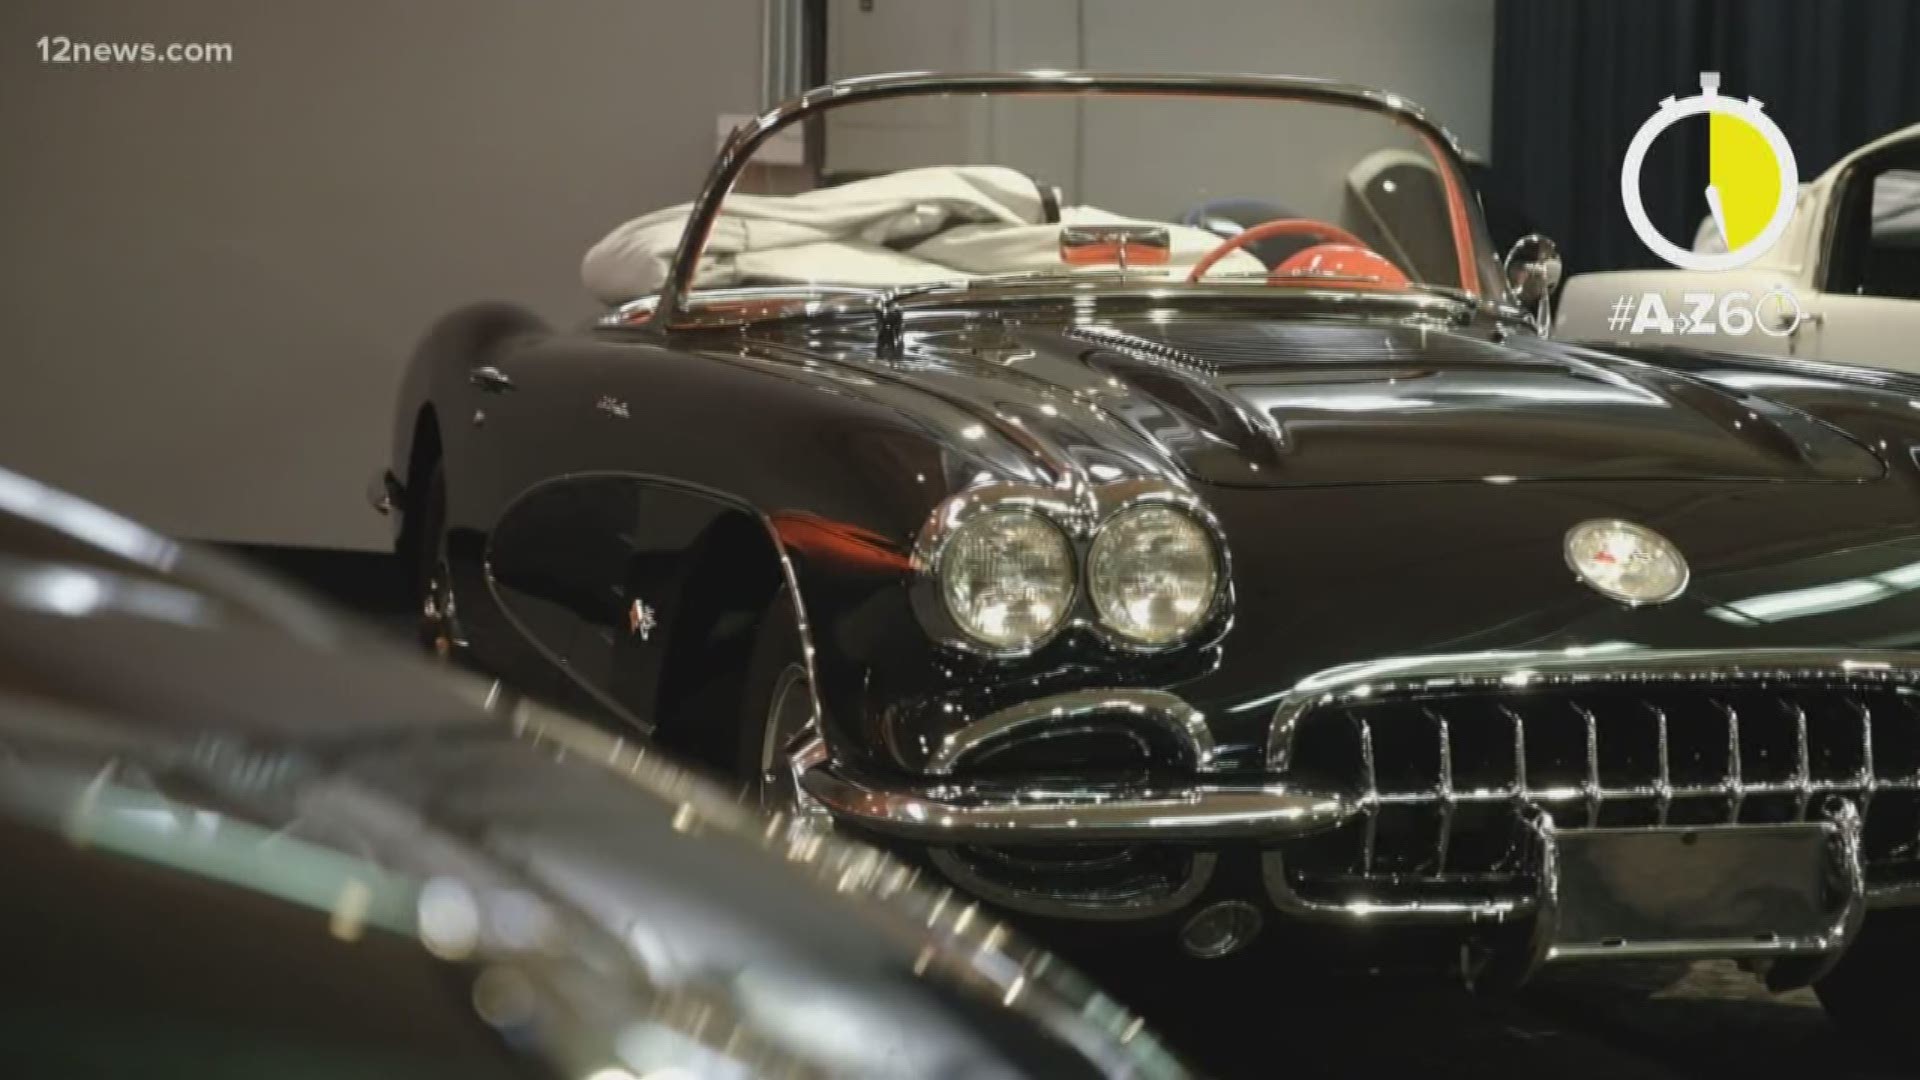 It's a car collection so rare and expensive that we can't tell you the exact location. Ryan Cody has the story.